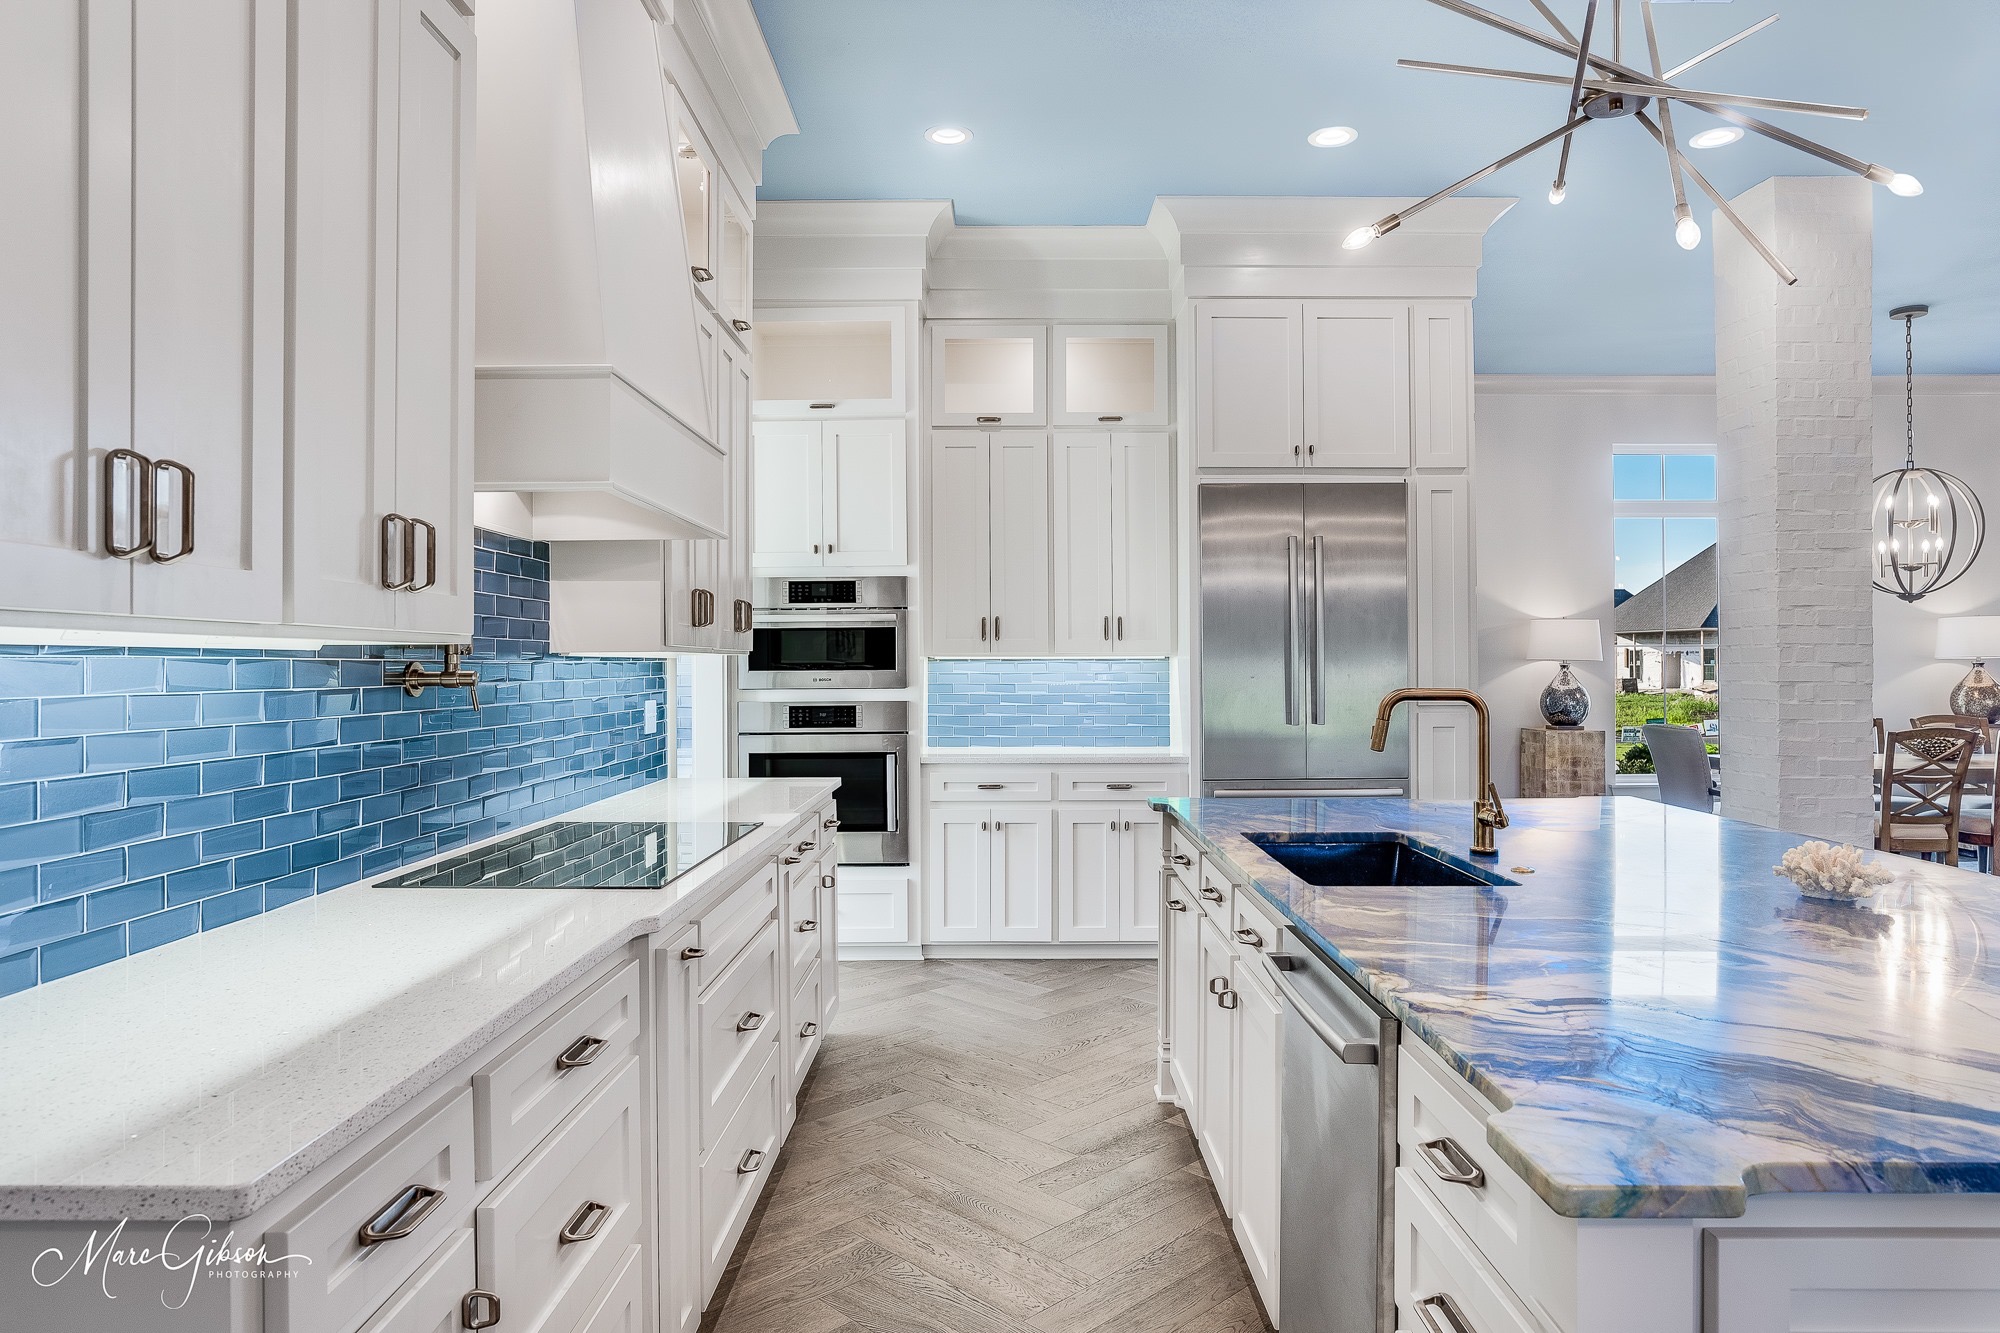 2019 St. Jude Dream Home | Rodgers Homes & Construction